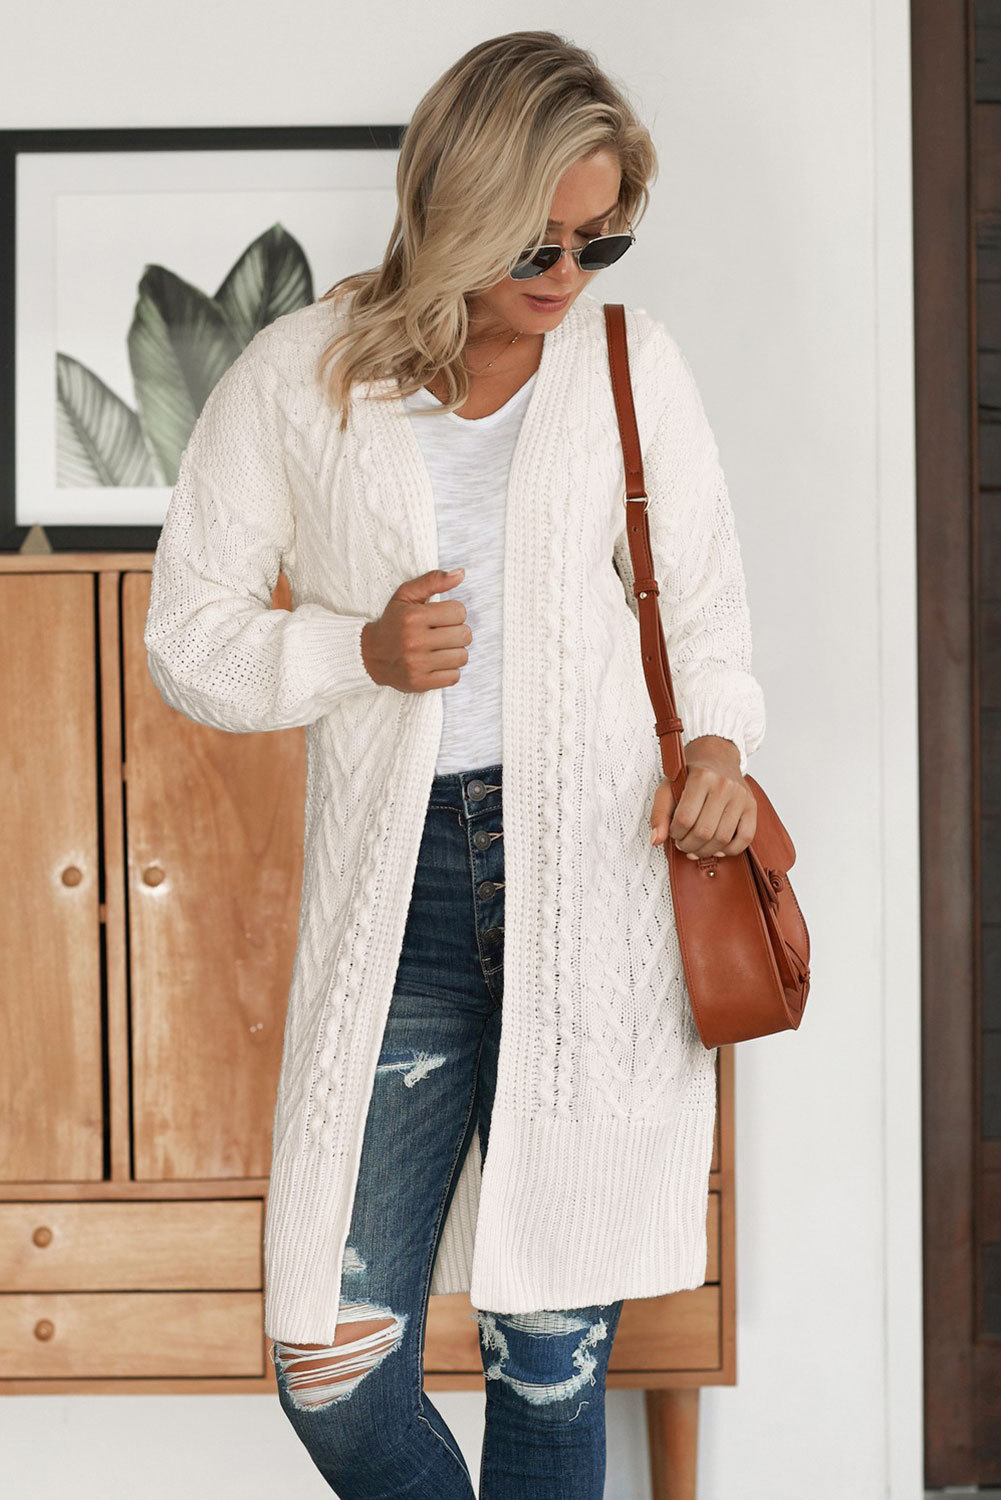 Plus Size So Chic - Long Front Open Cardigan Σε 2 Χρώματα